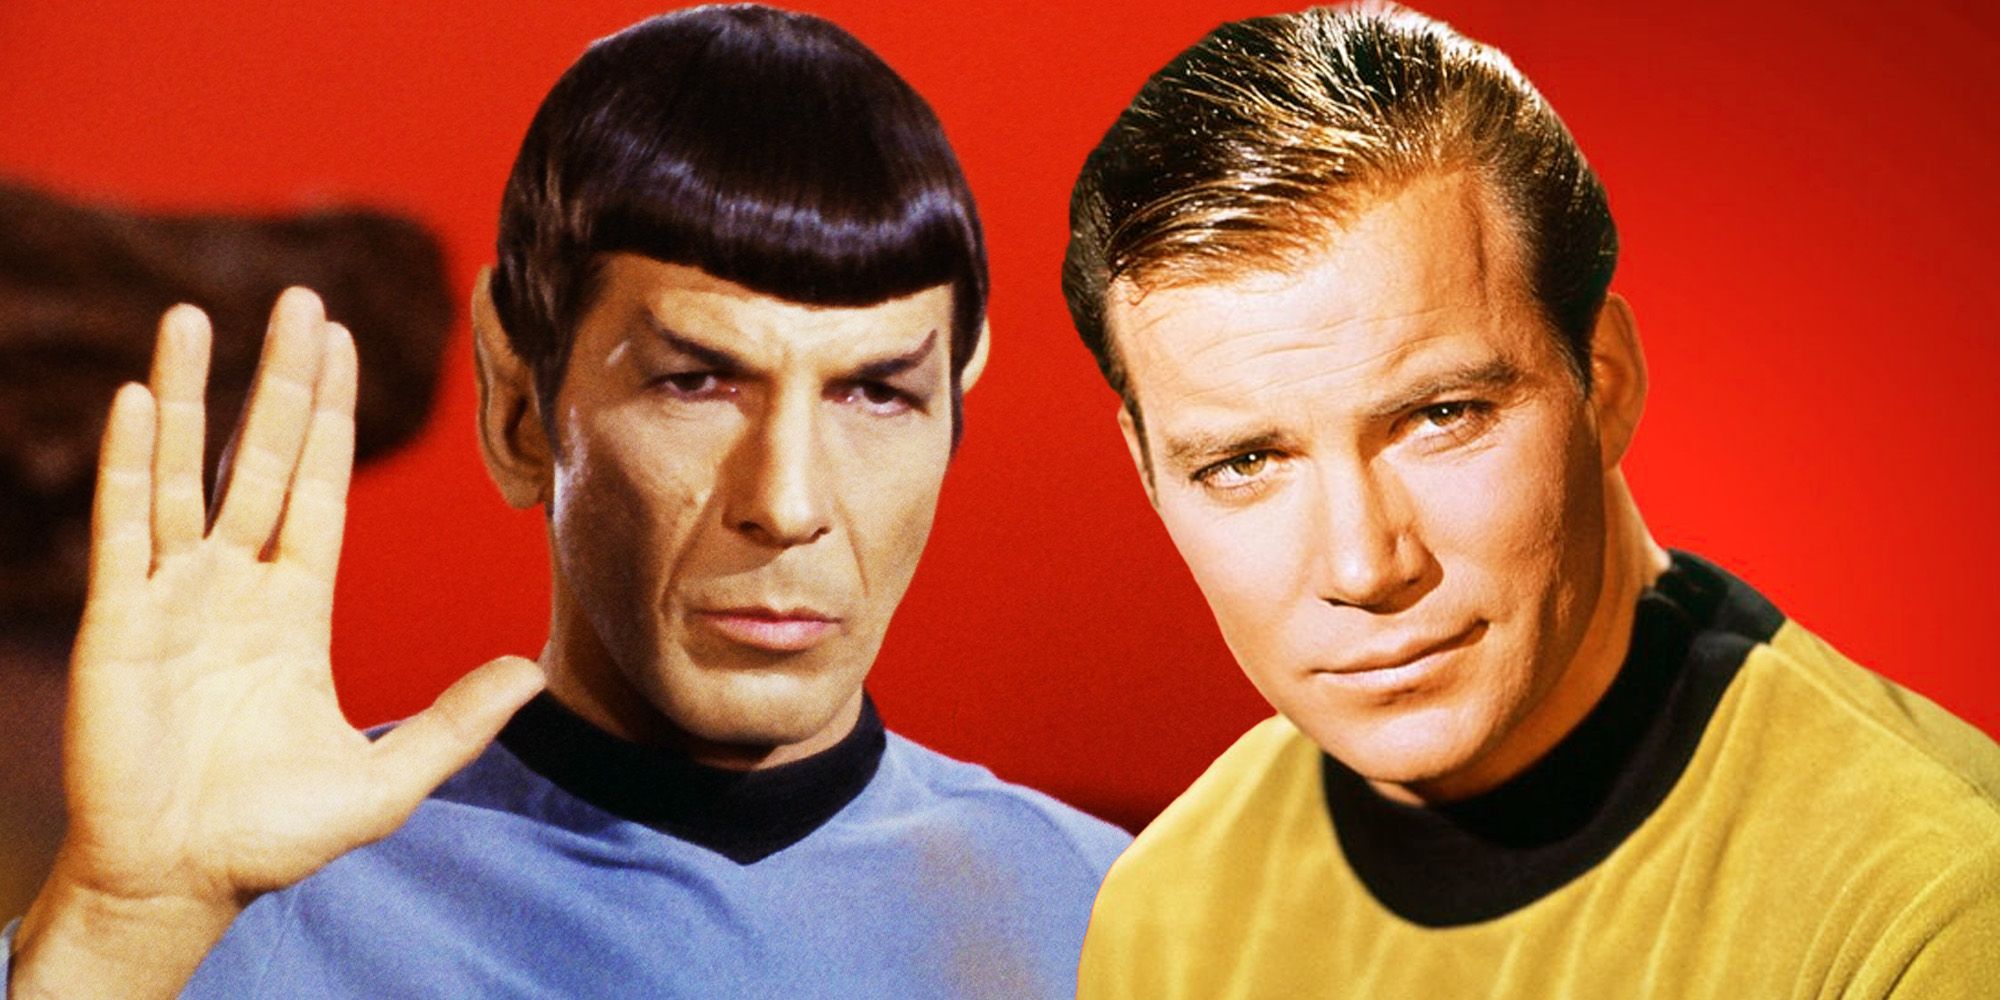 Star Trek’s William Shatner Remembers Leonard Nimoy As “A Magnificent Giver”